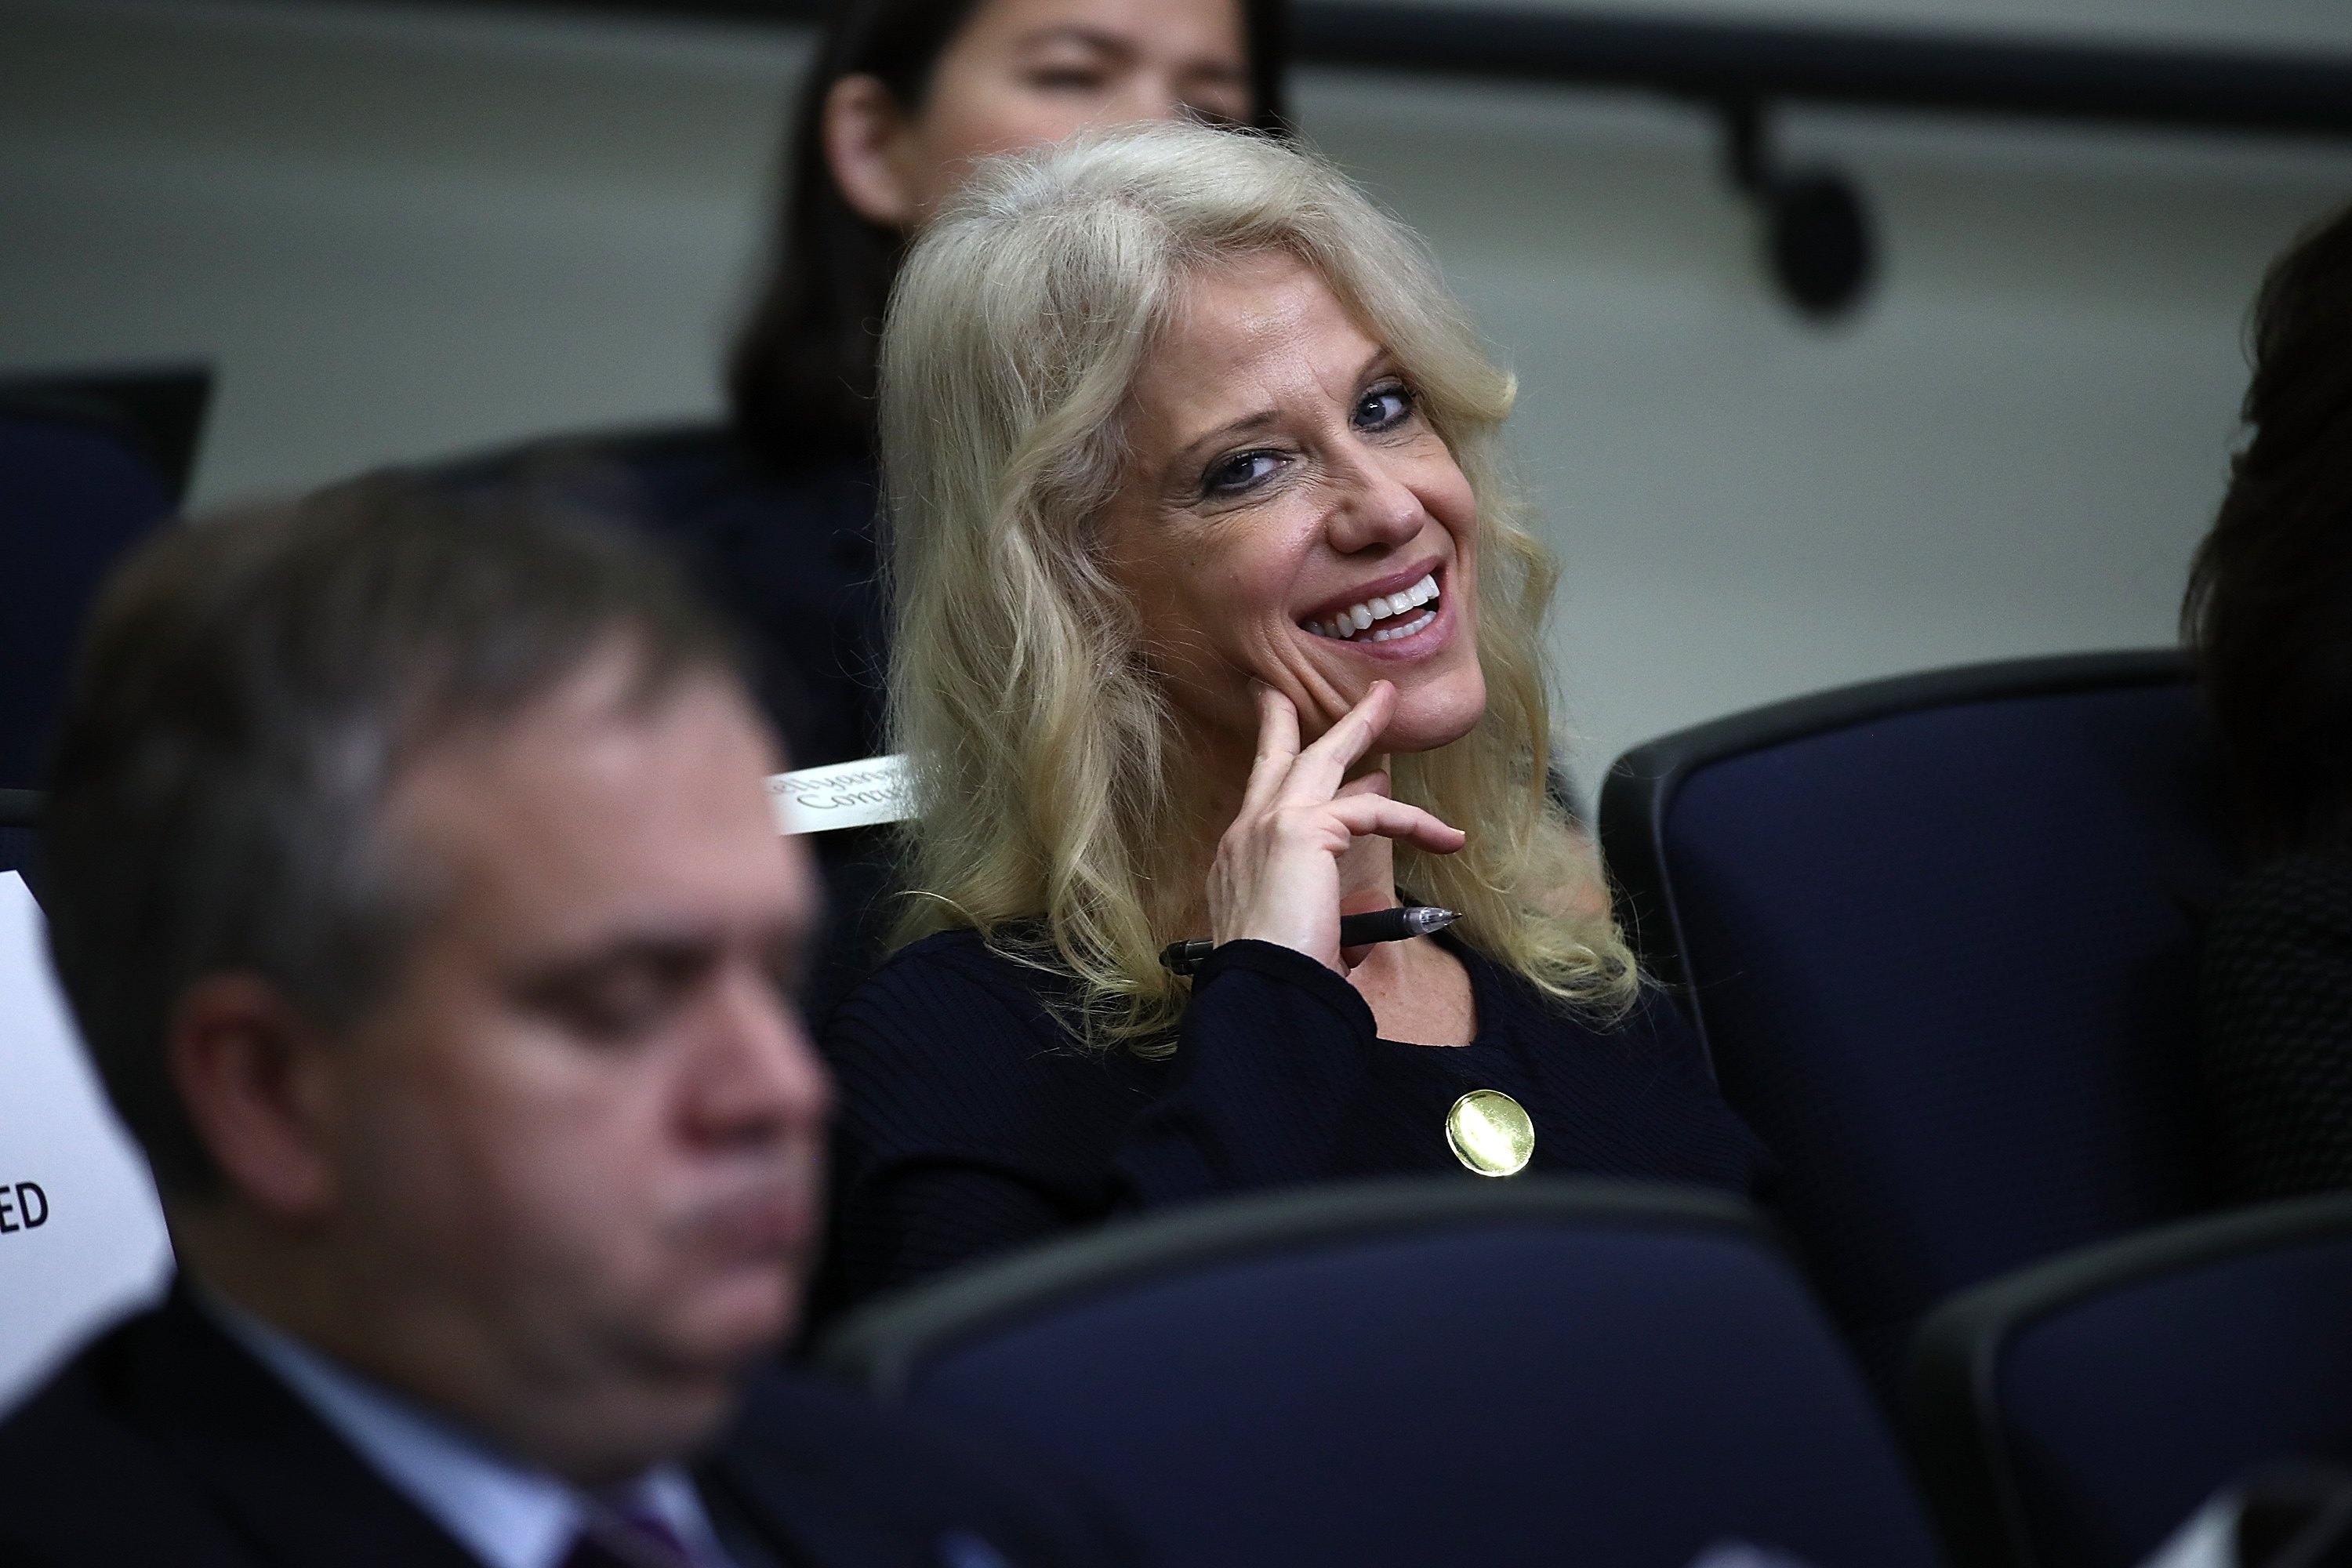 Kellyanne Conway, a counselor to U.S. President Donald Trump, attends an event